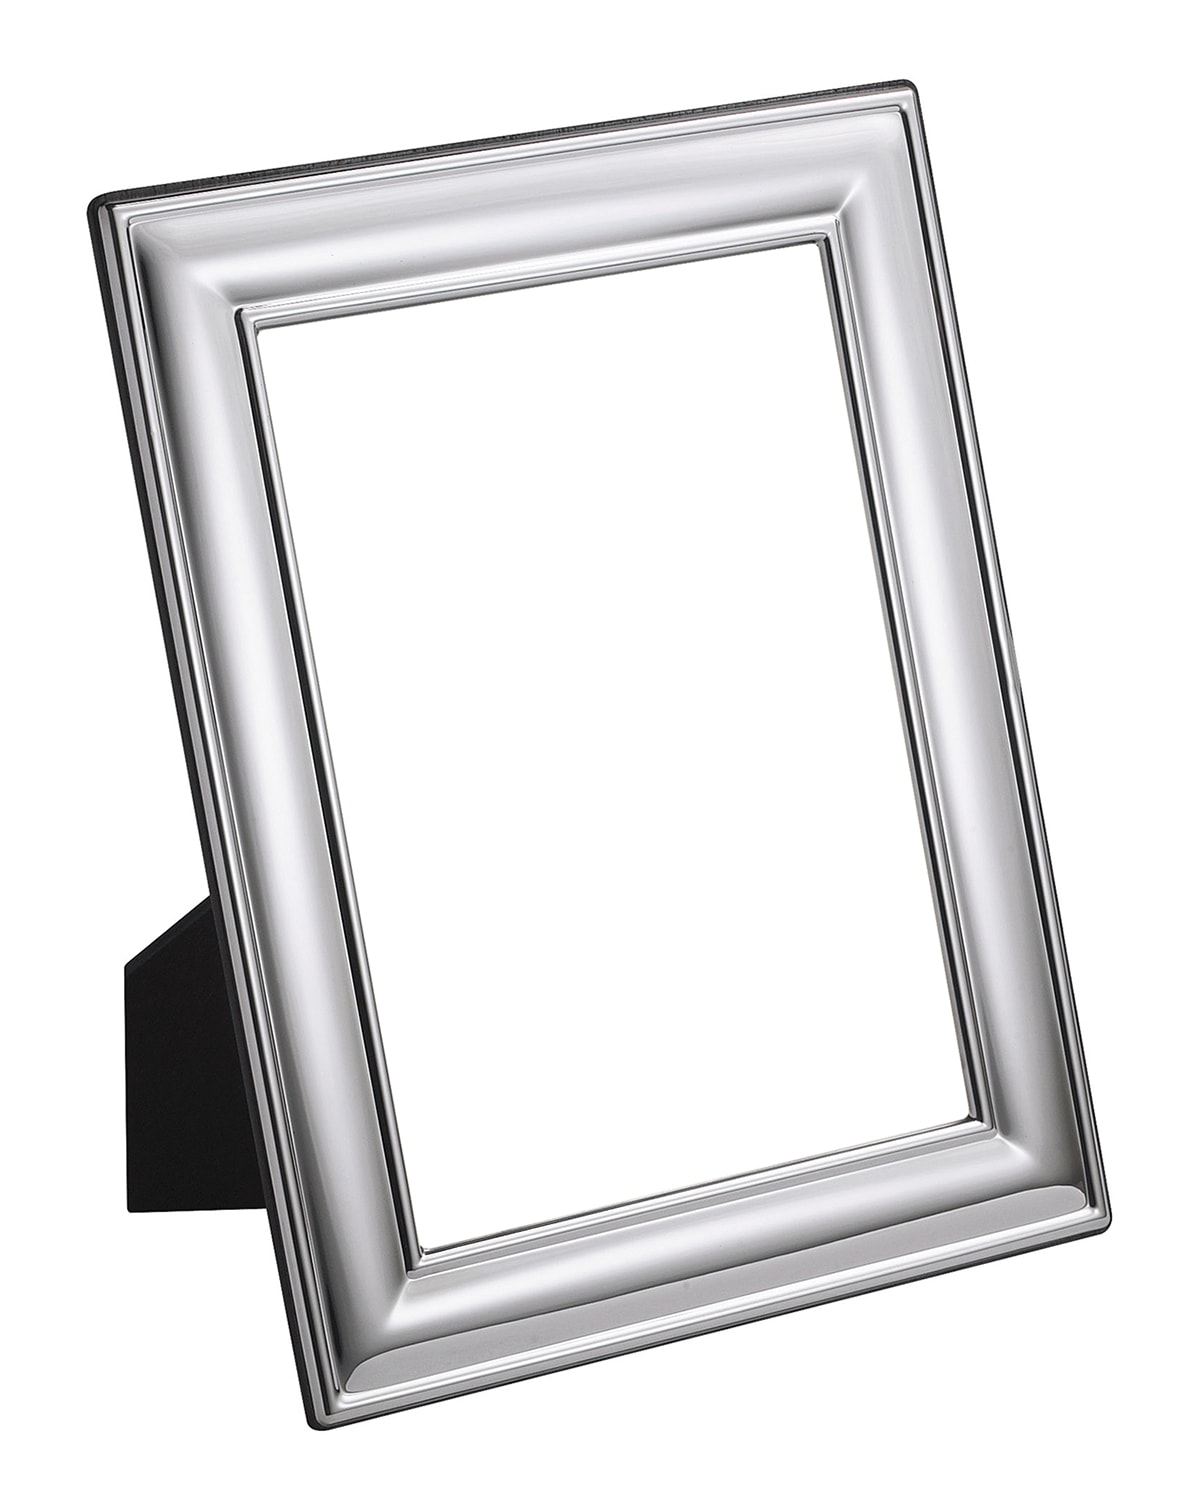 5x7 4x6 6x8 5 x 7, Double Silver Plated Photo Frame Premium Silver Plated Photo Frames Various Sizes: 8x10 